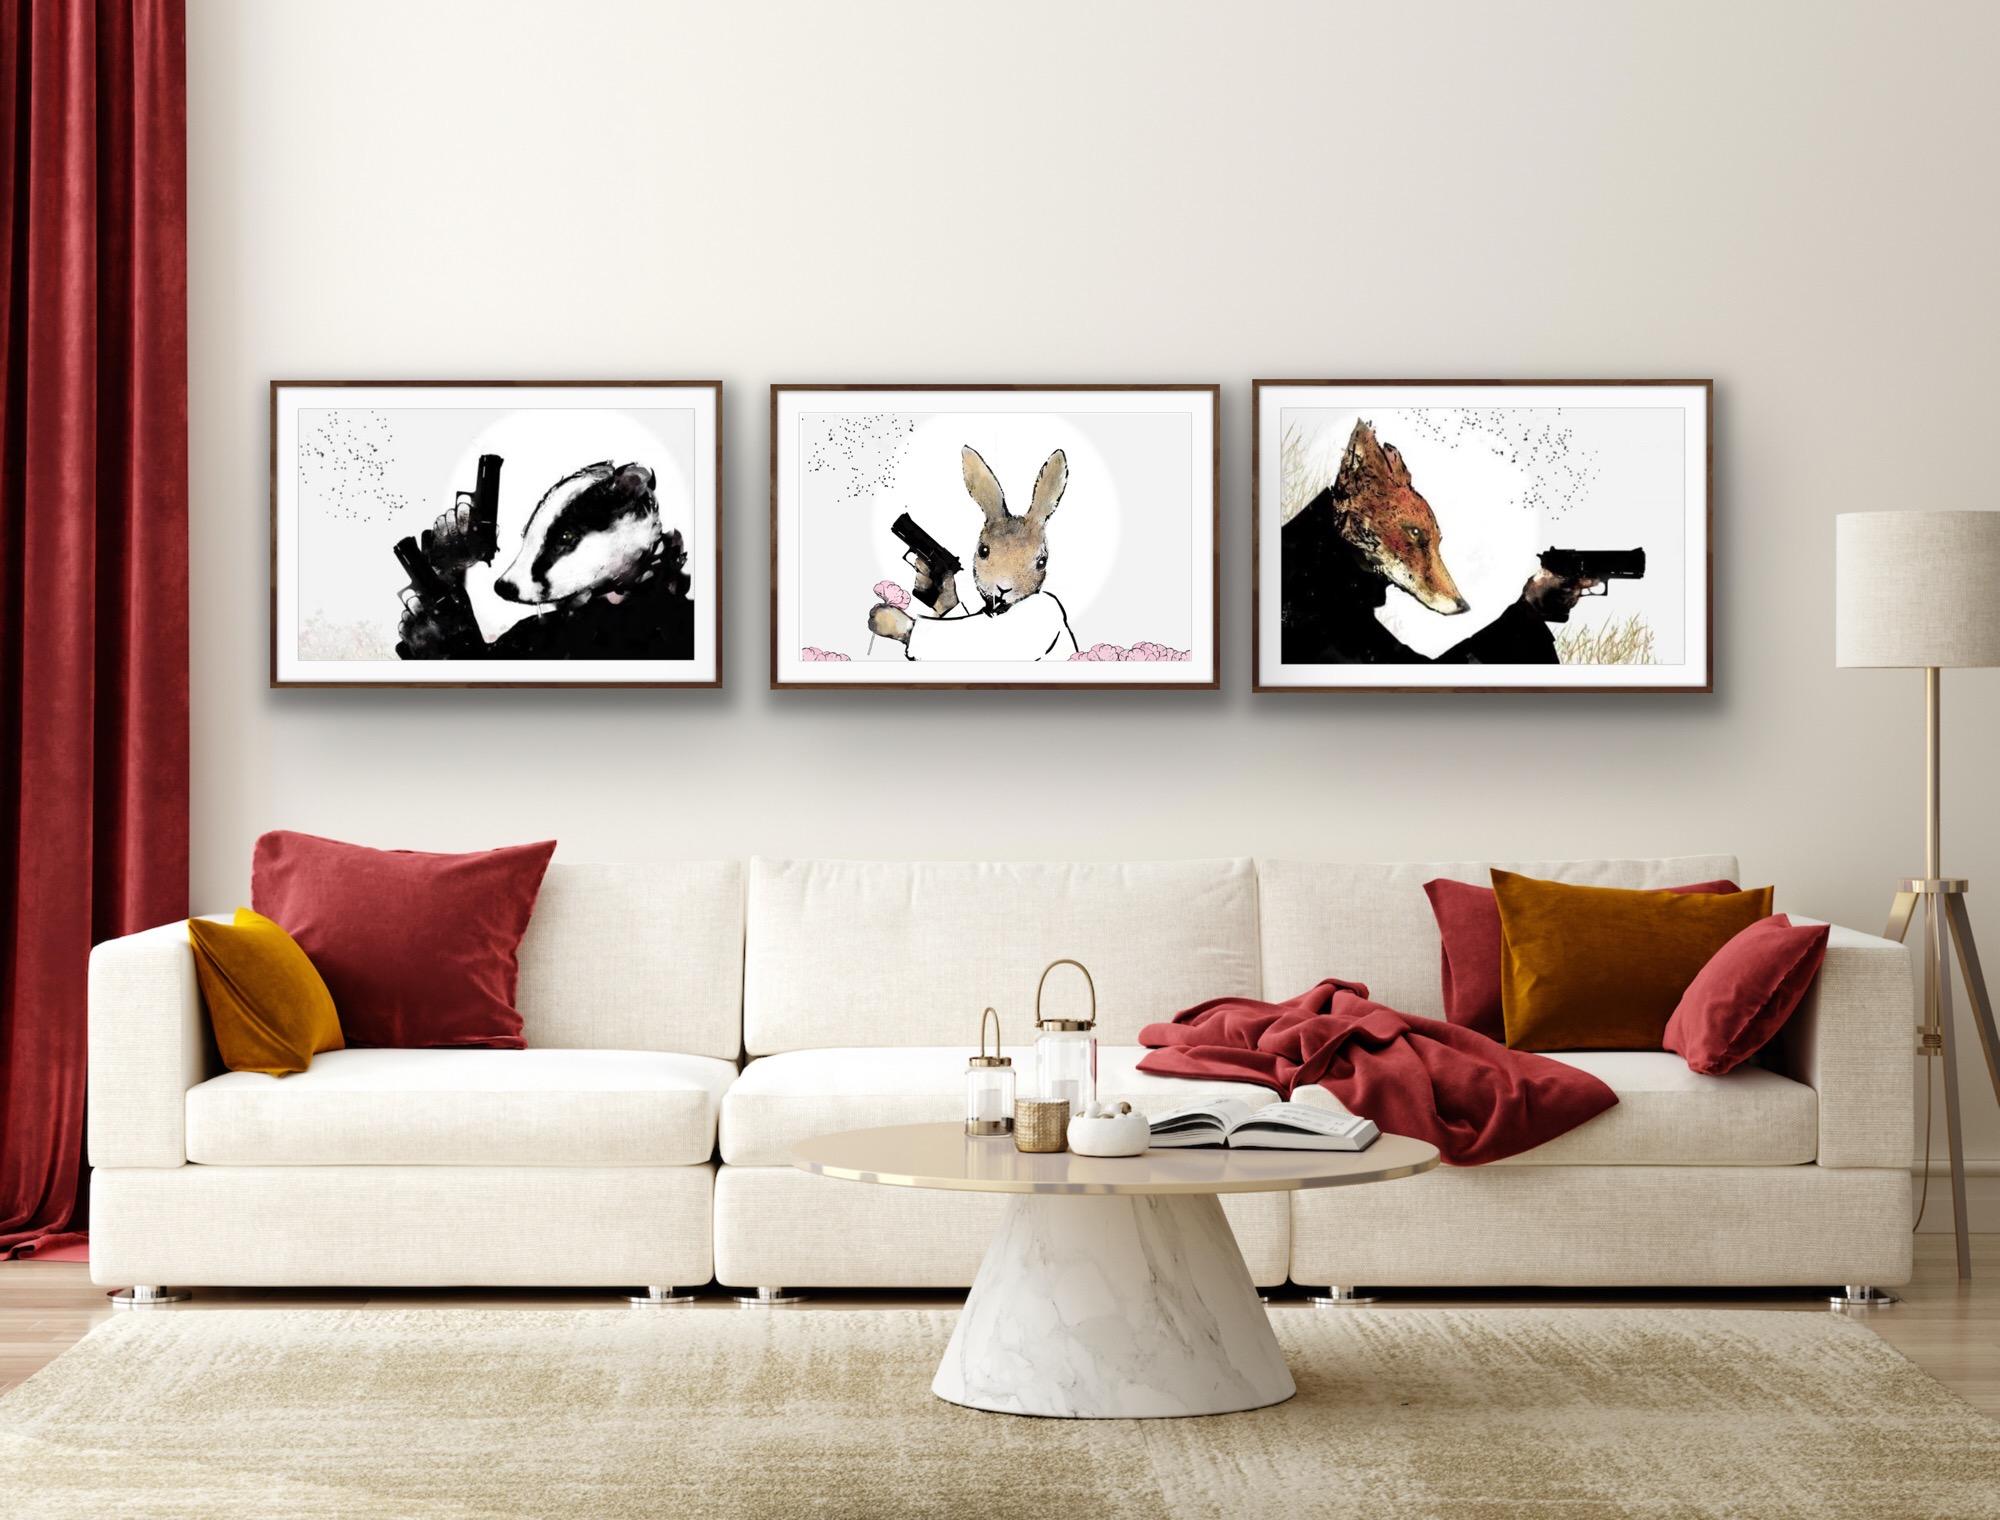 Triptych of Rural Resistance Series, Animal print, Bunny, Abstract print - Print by Harry Bunce